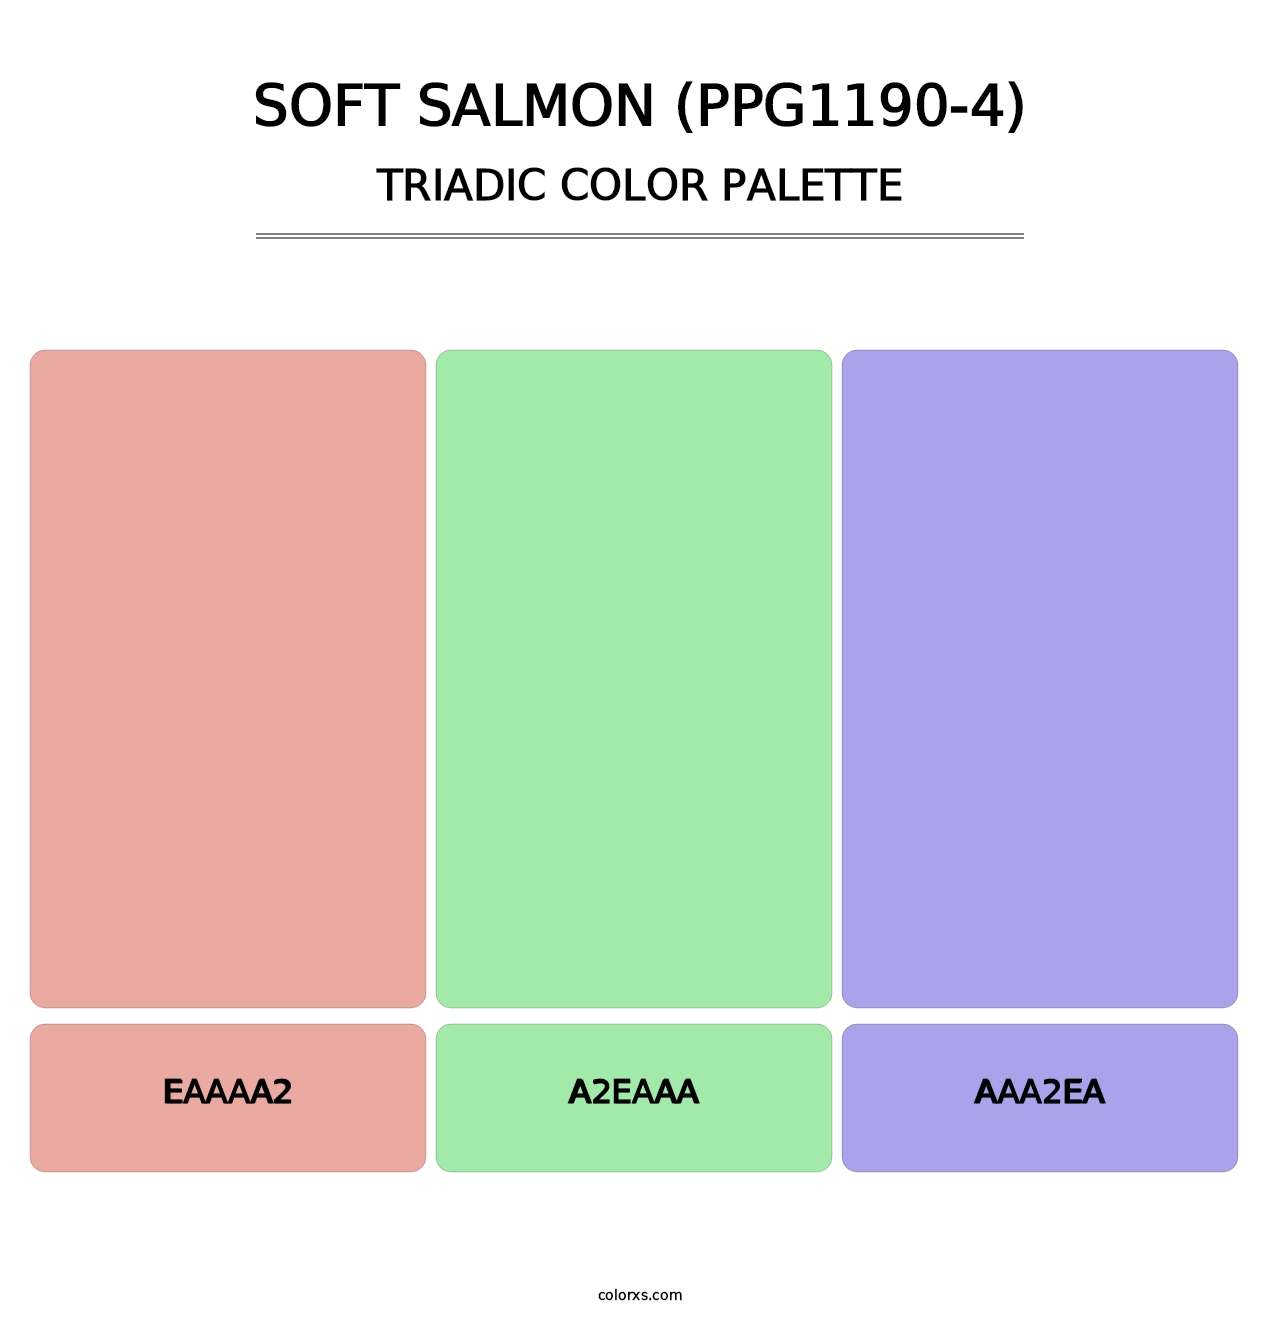 Soft Salmon (PPG1190-4) - Triadic Color Palette